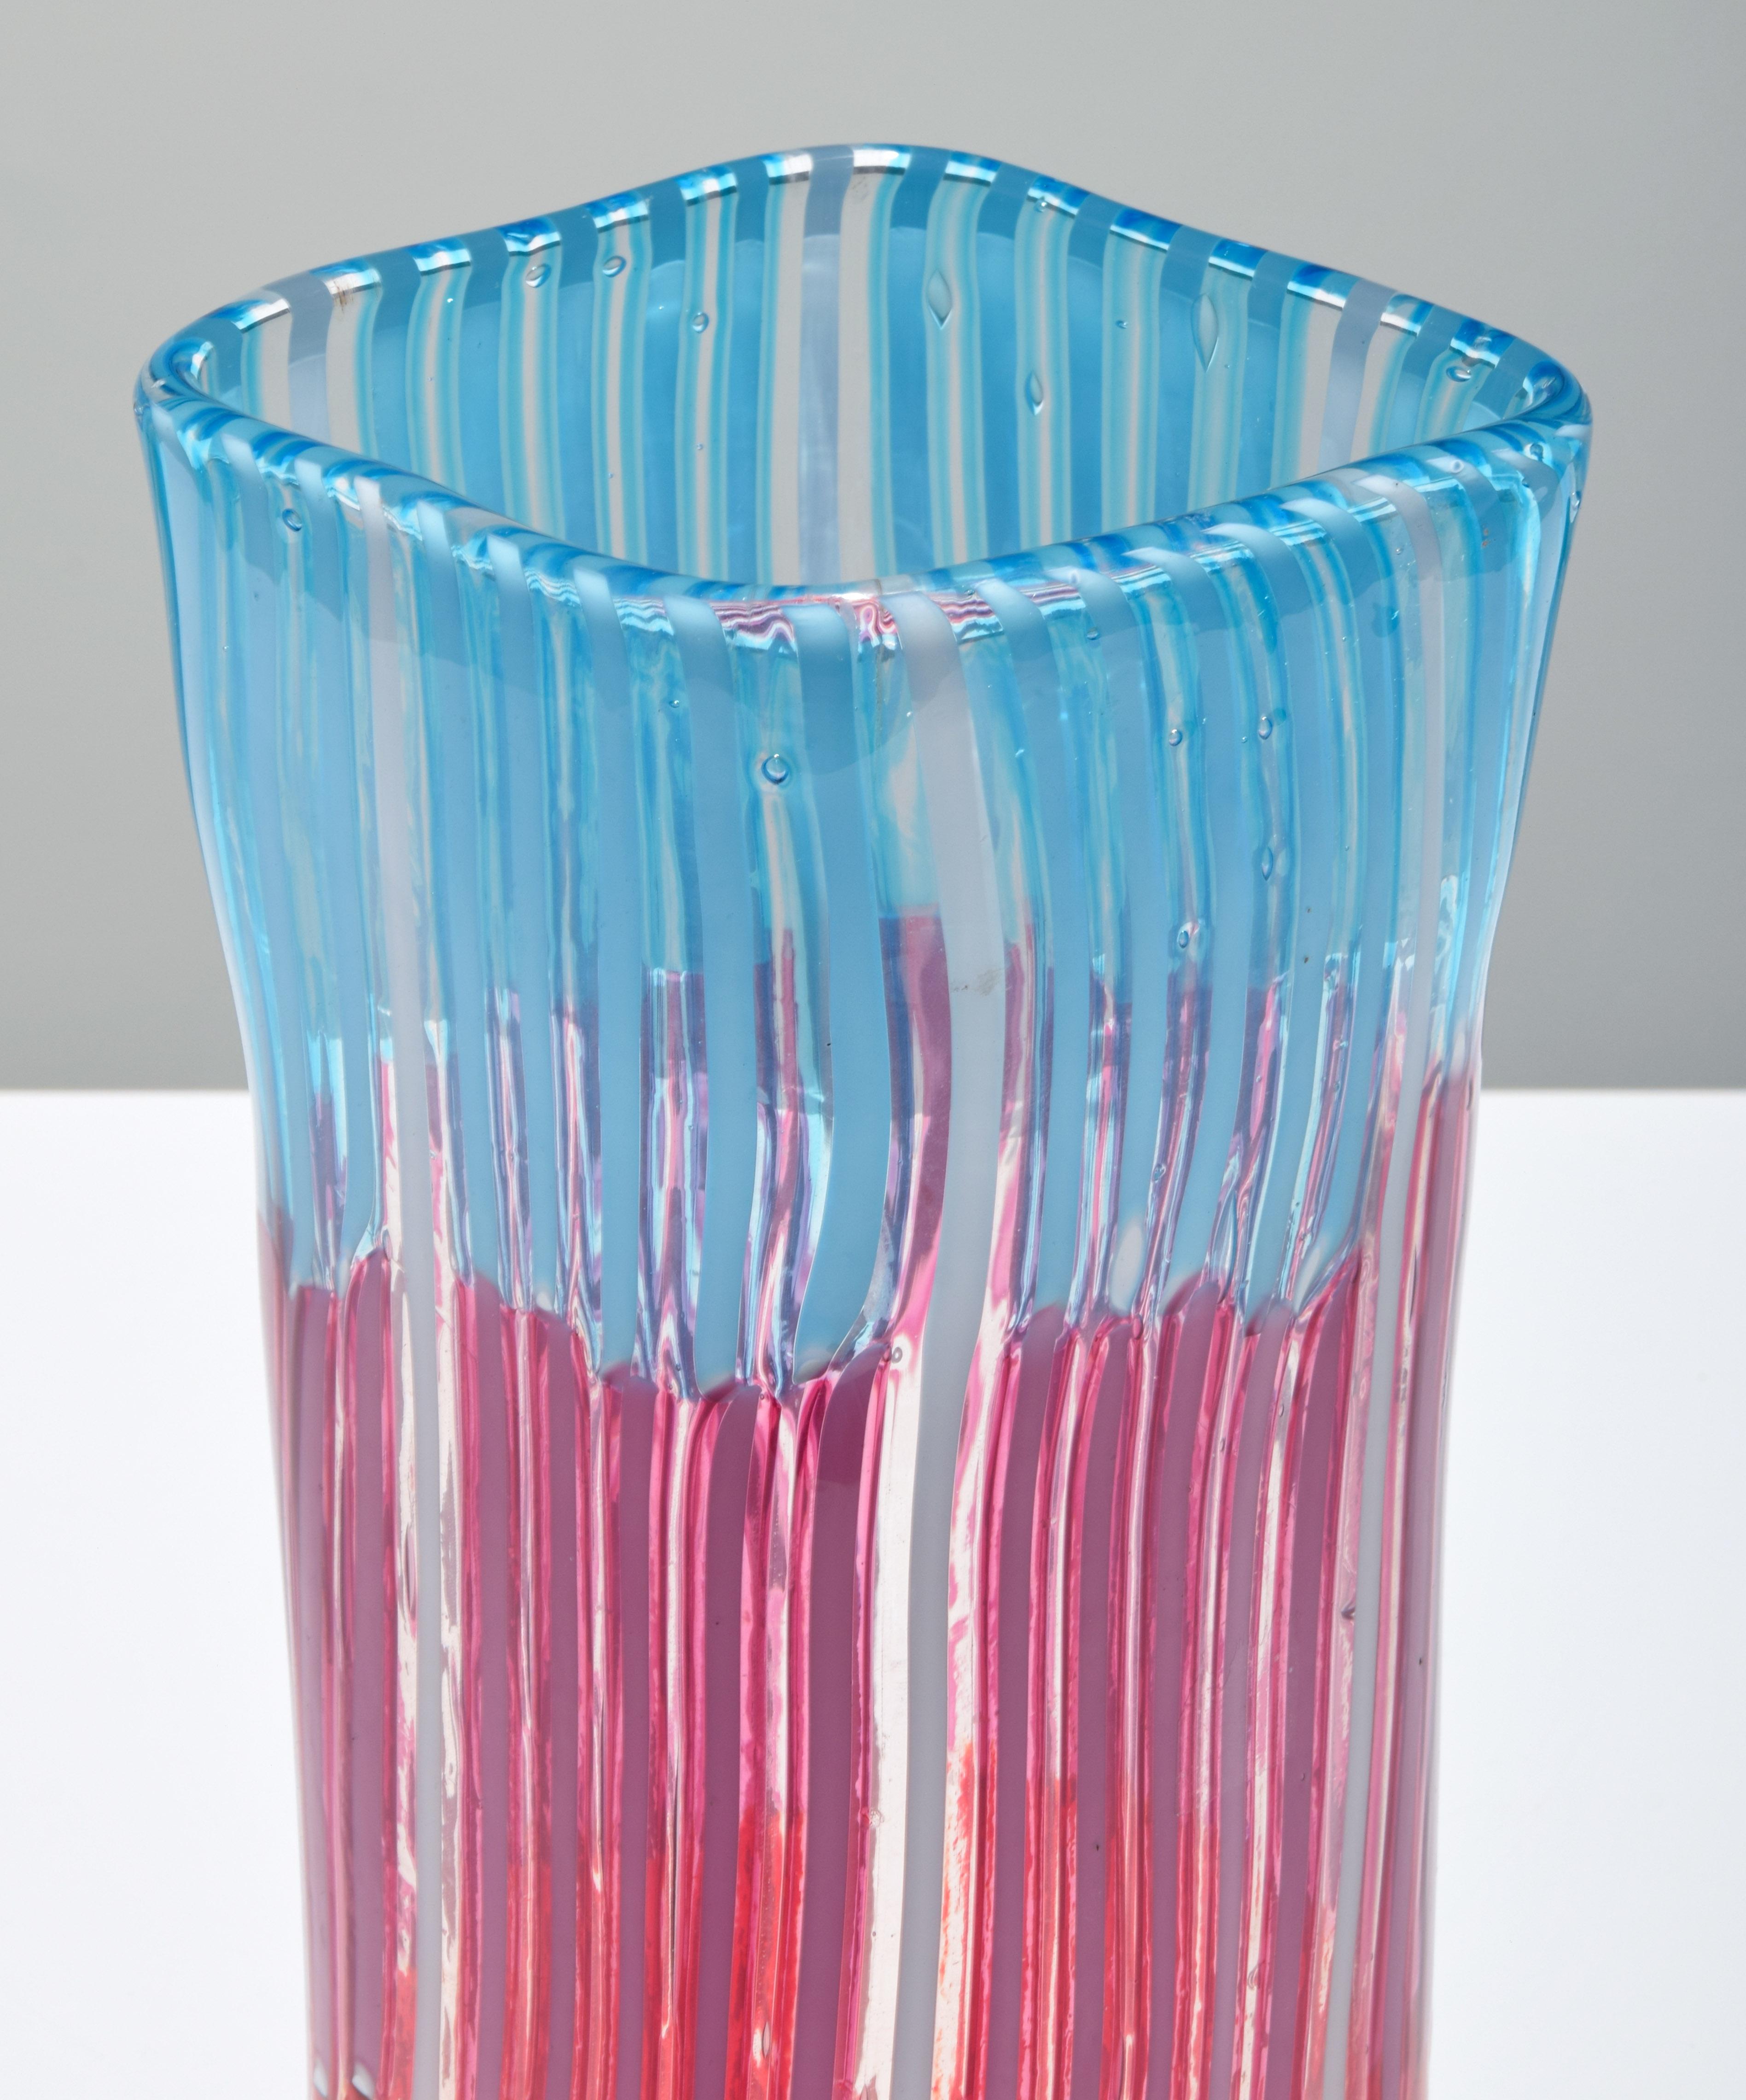 Artist/Designer: Anzolo Fuga (Italian, 1914-1998); Arte Vetraria Muranese (A.V.E.M.)

Additional Information: The hand blown vase has vertical rods.

Marking(s); notes: no marking(s) apparent

Country of origin; materials: Italy; glass

Dimensions: